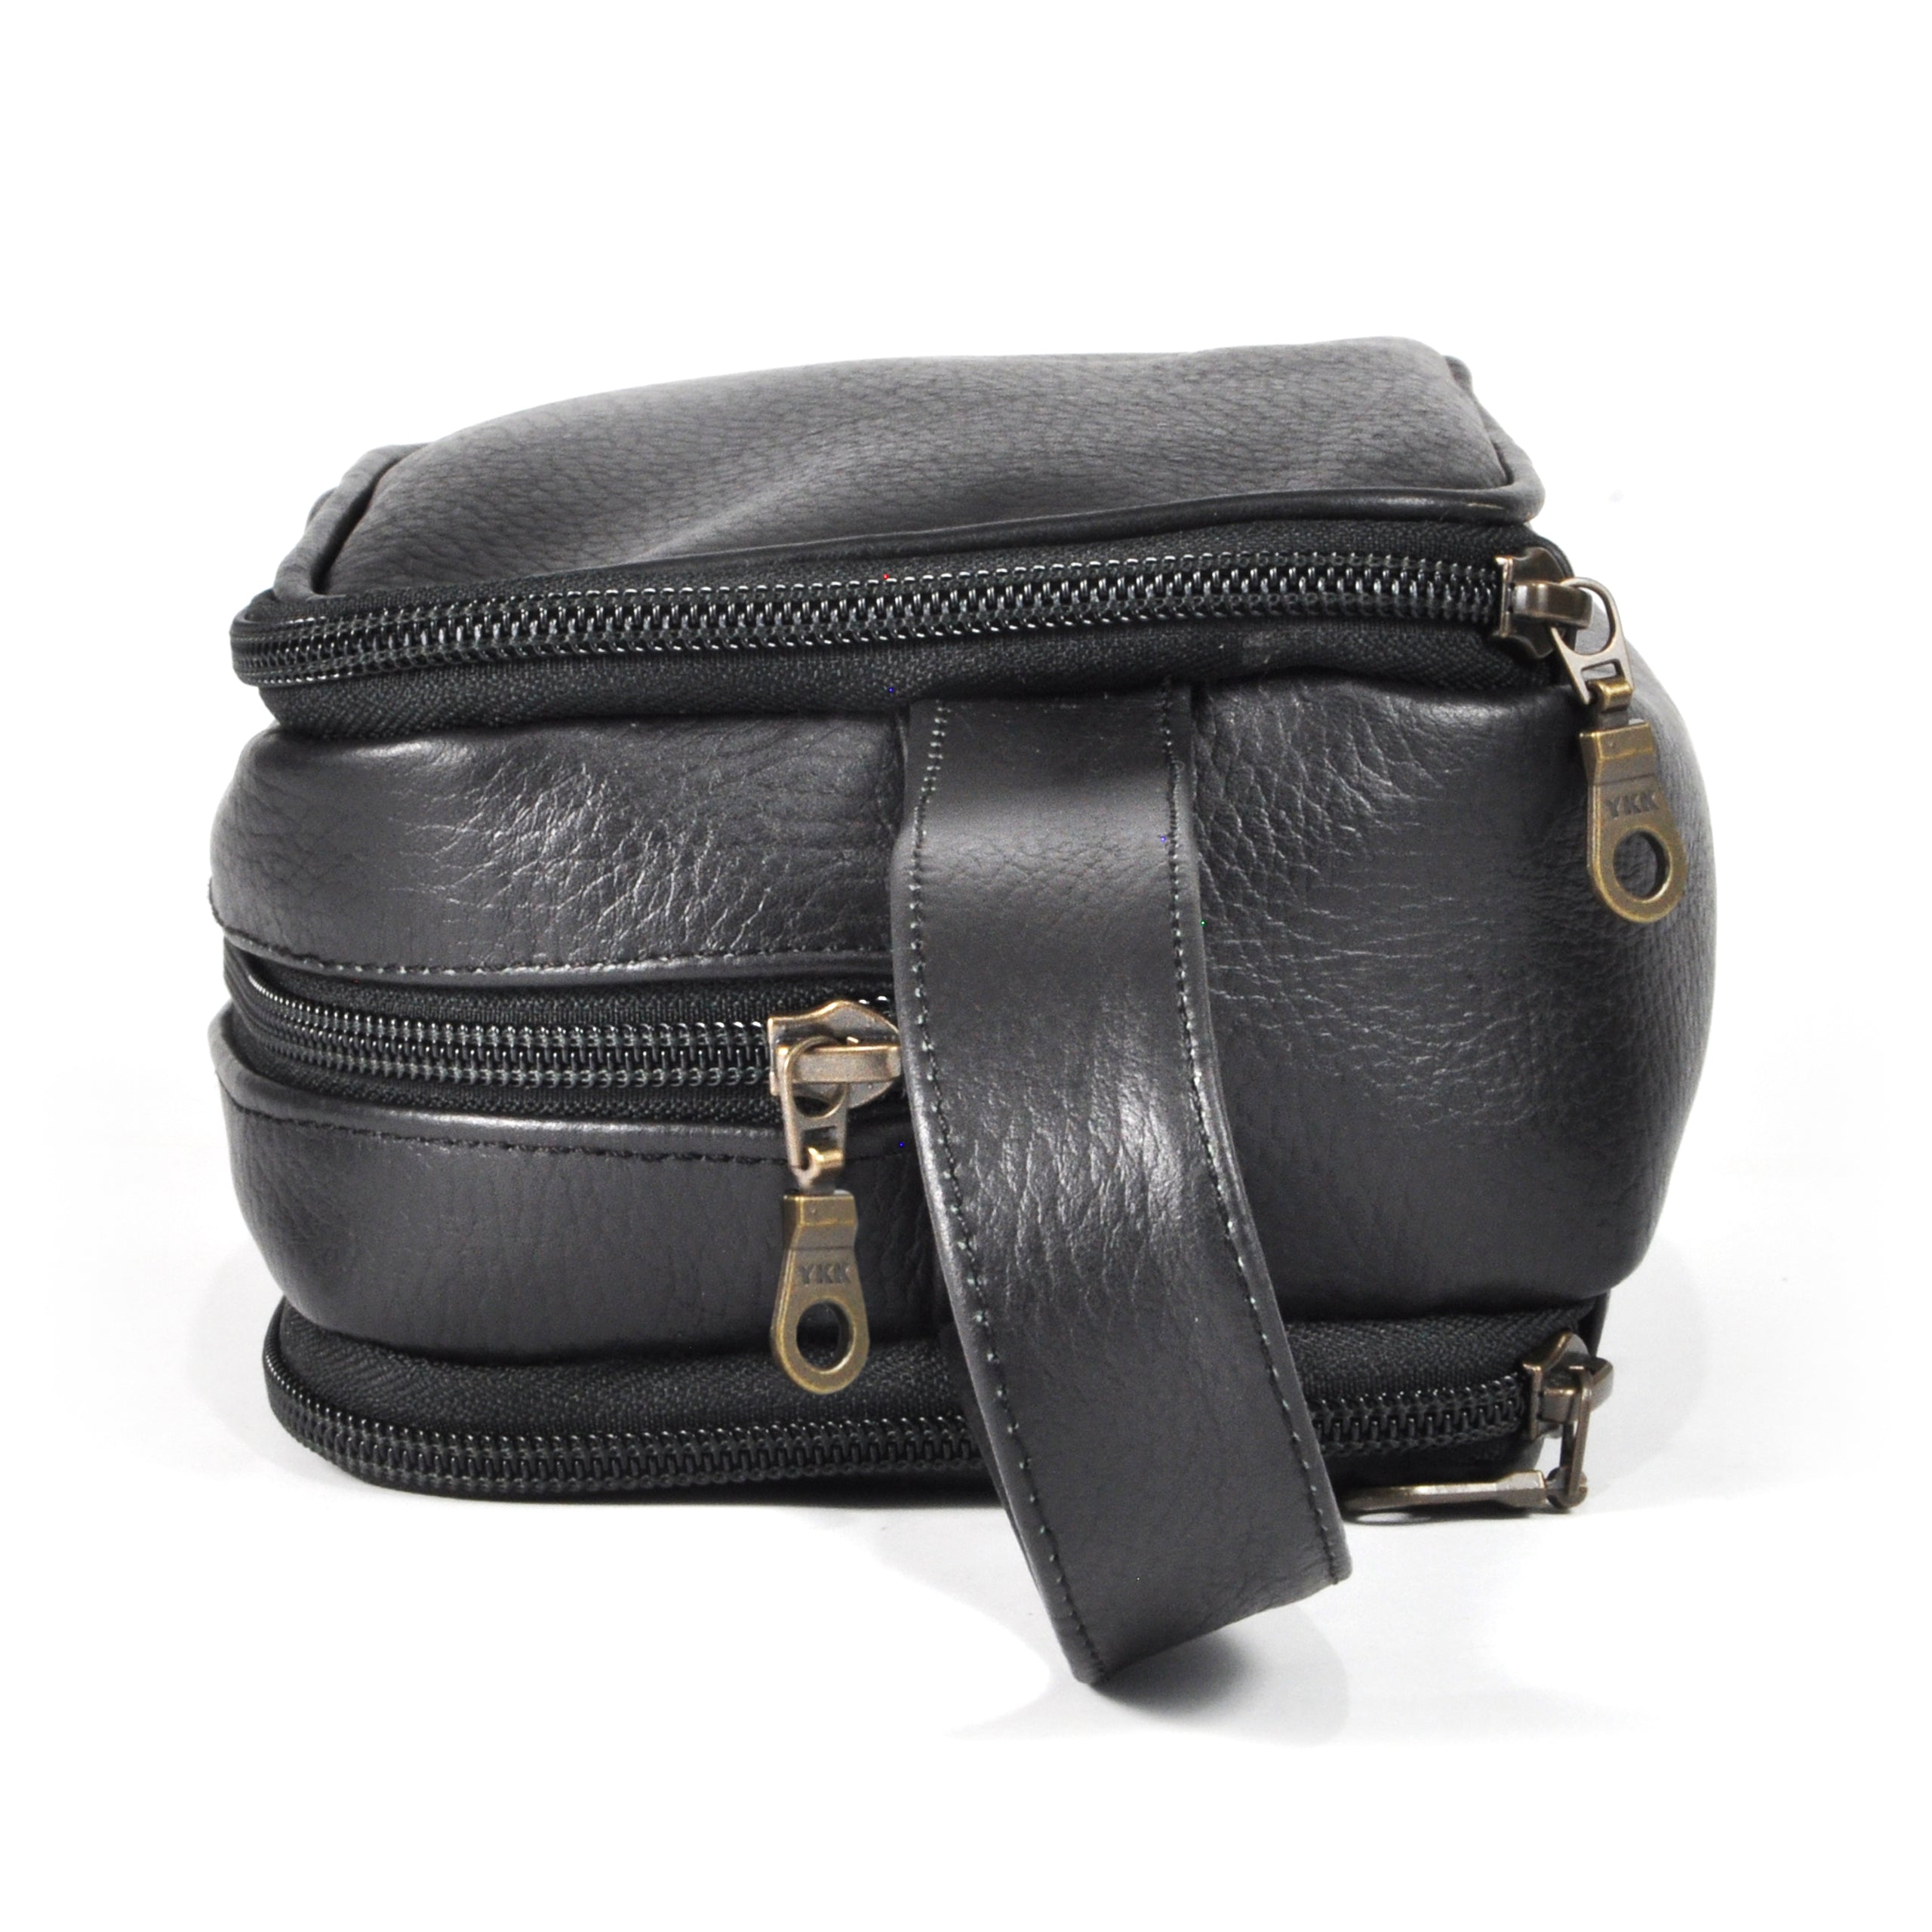 Black Leather Pouch Bag